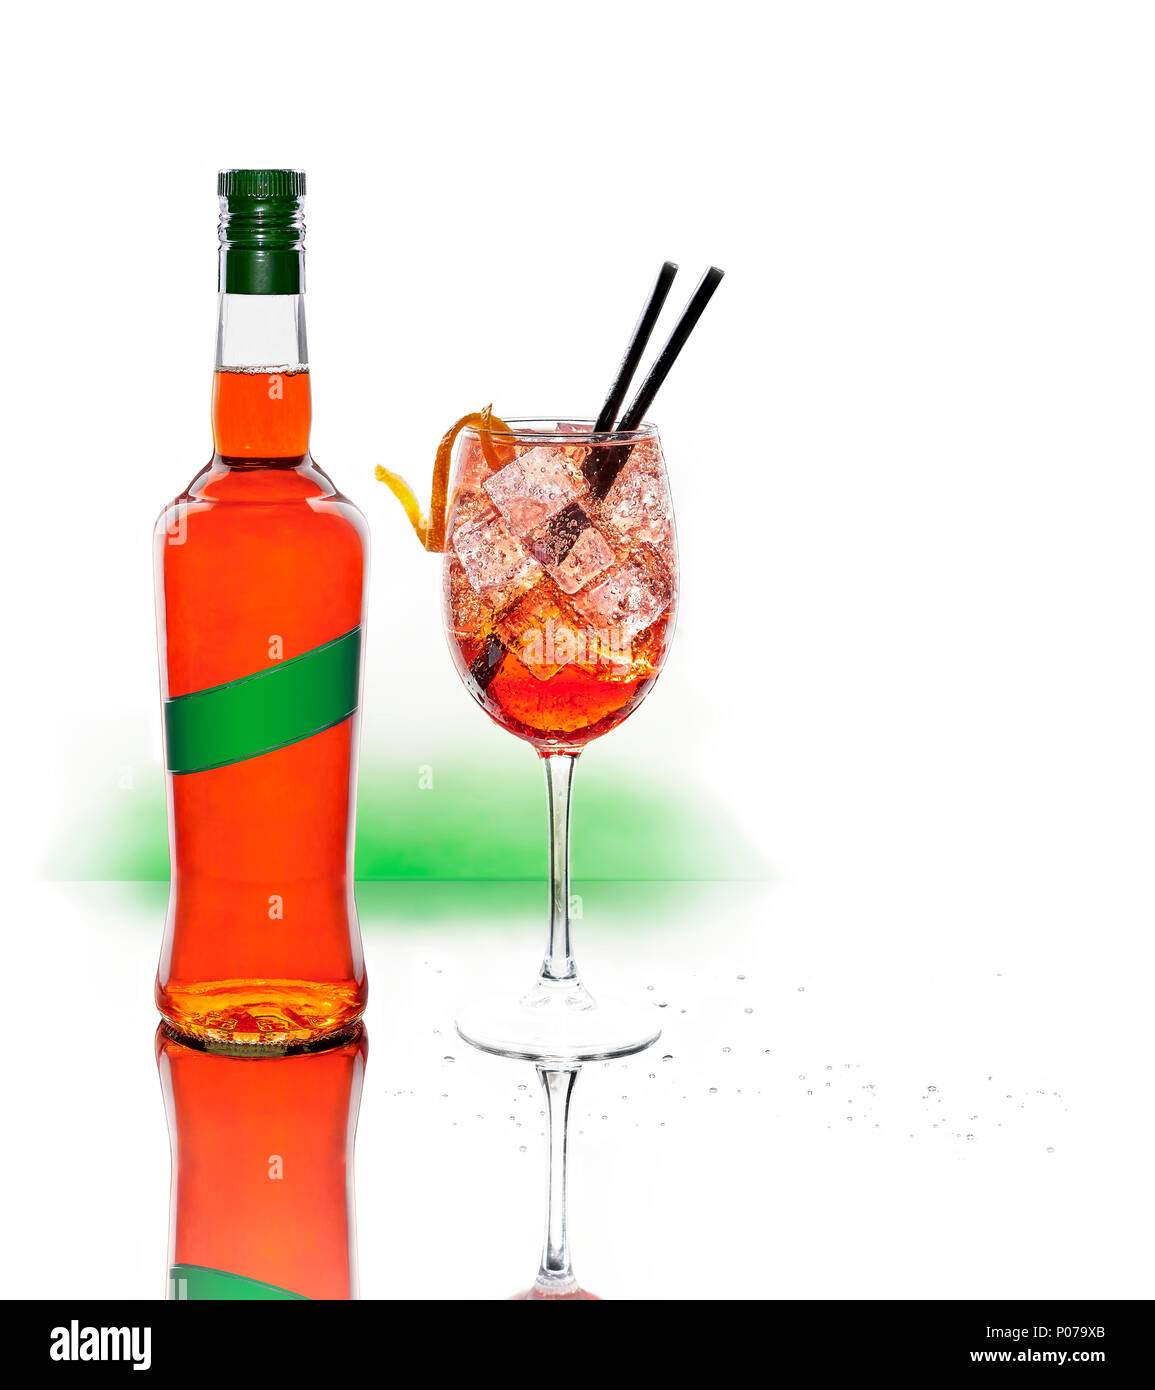 A liquor bottle and a cup of Spritz. Cold cocktail typical at Italian aperitivo or apericena on white background. Stock Photo